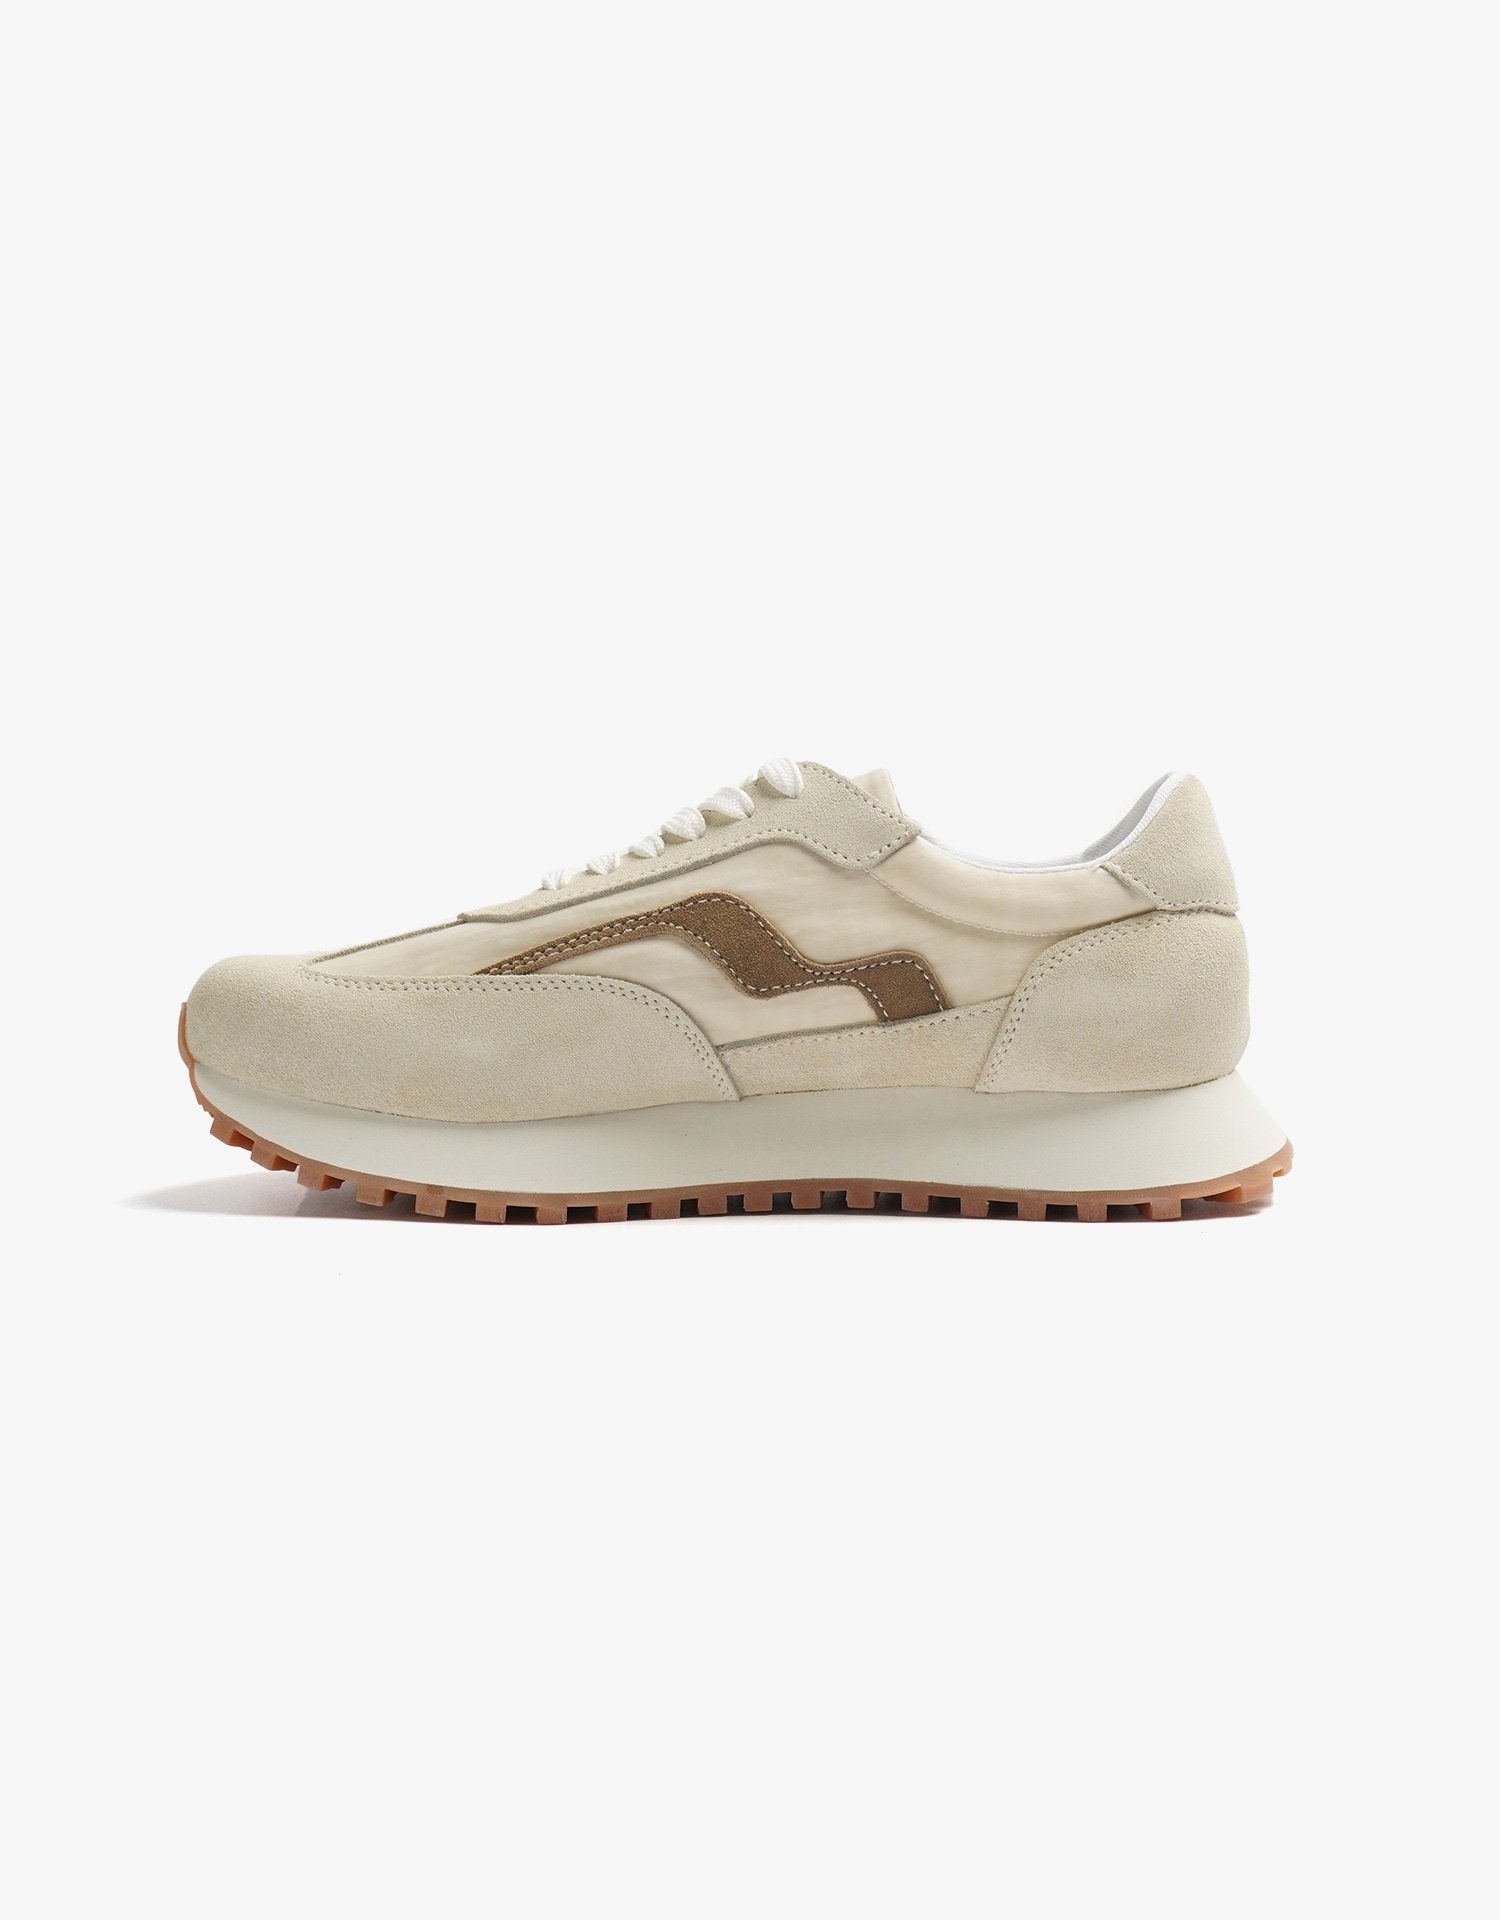 TopBasics Suede M-Pat. Running Shoes